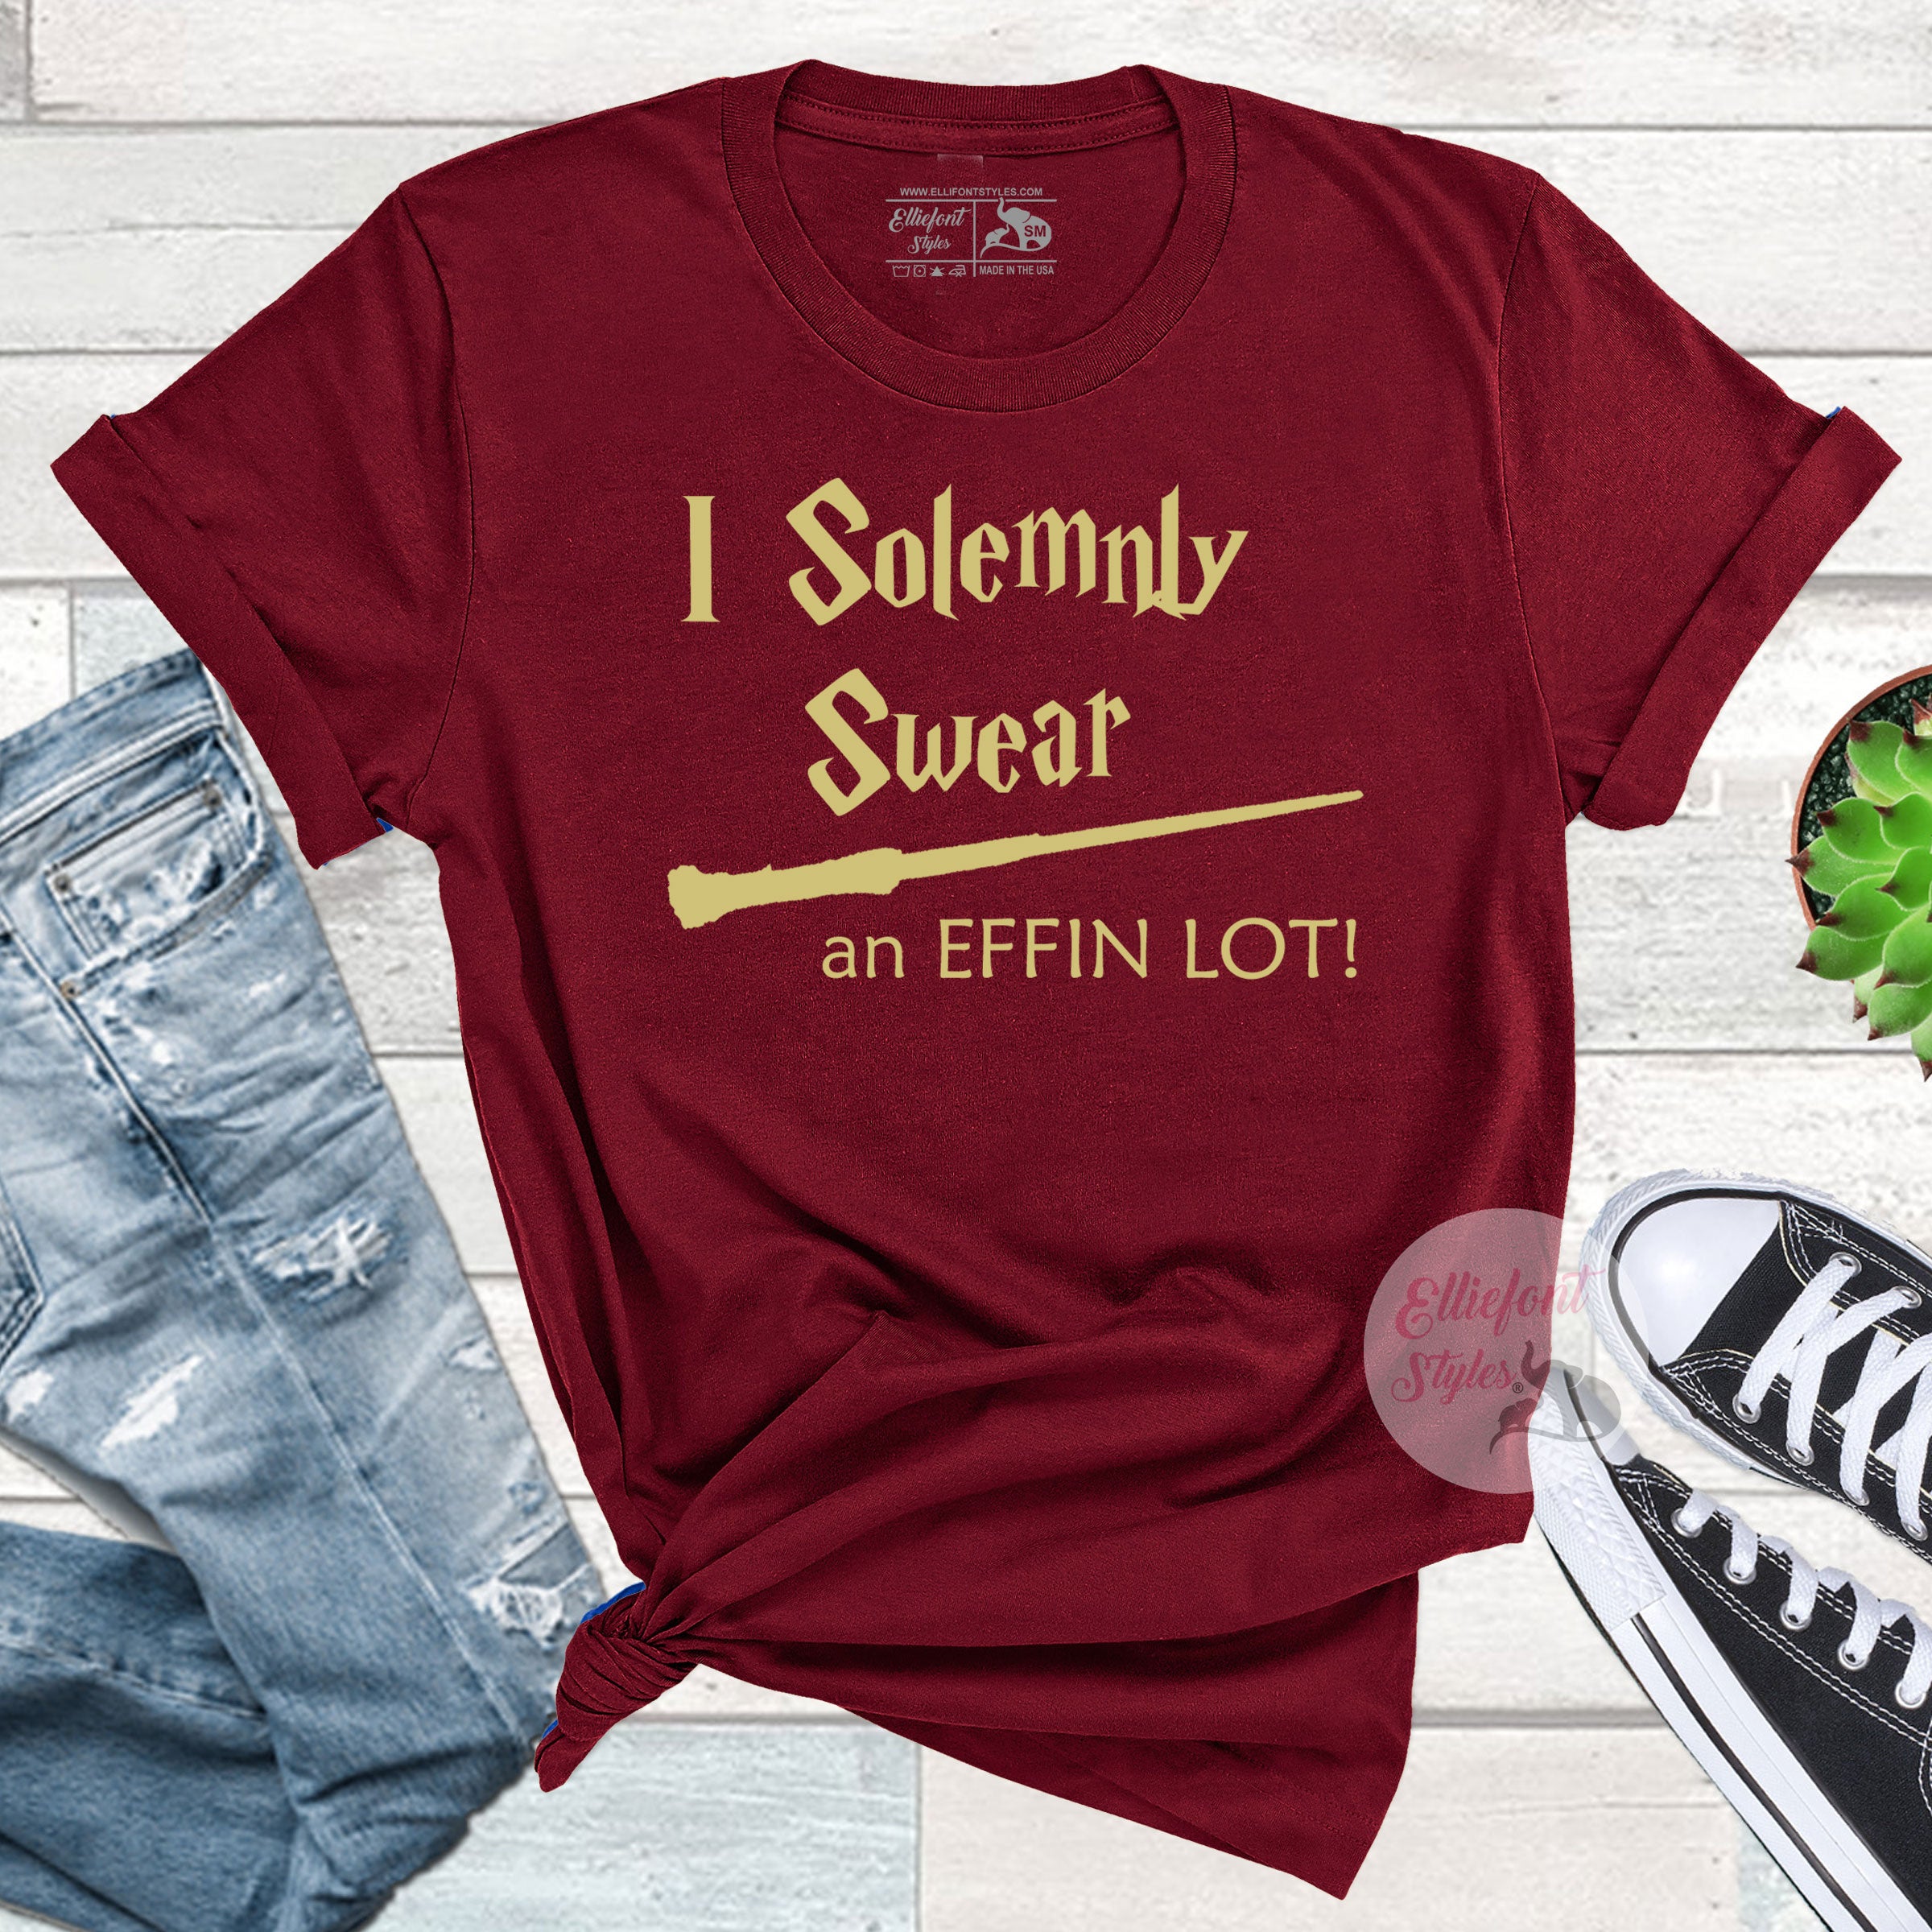 I Solemnly Swear An Effin Lot Harry Potter Shirt – Elliefont Styles